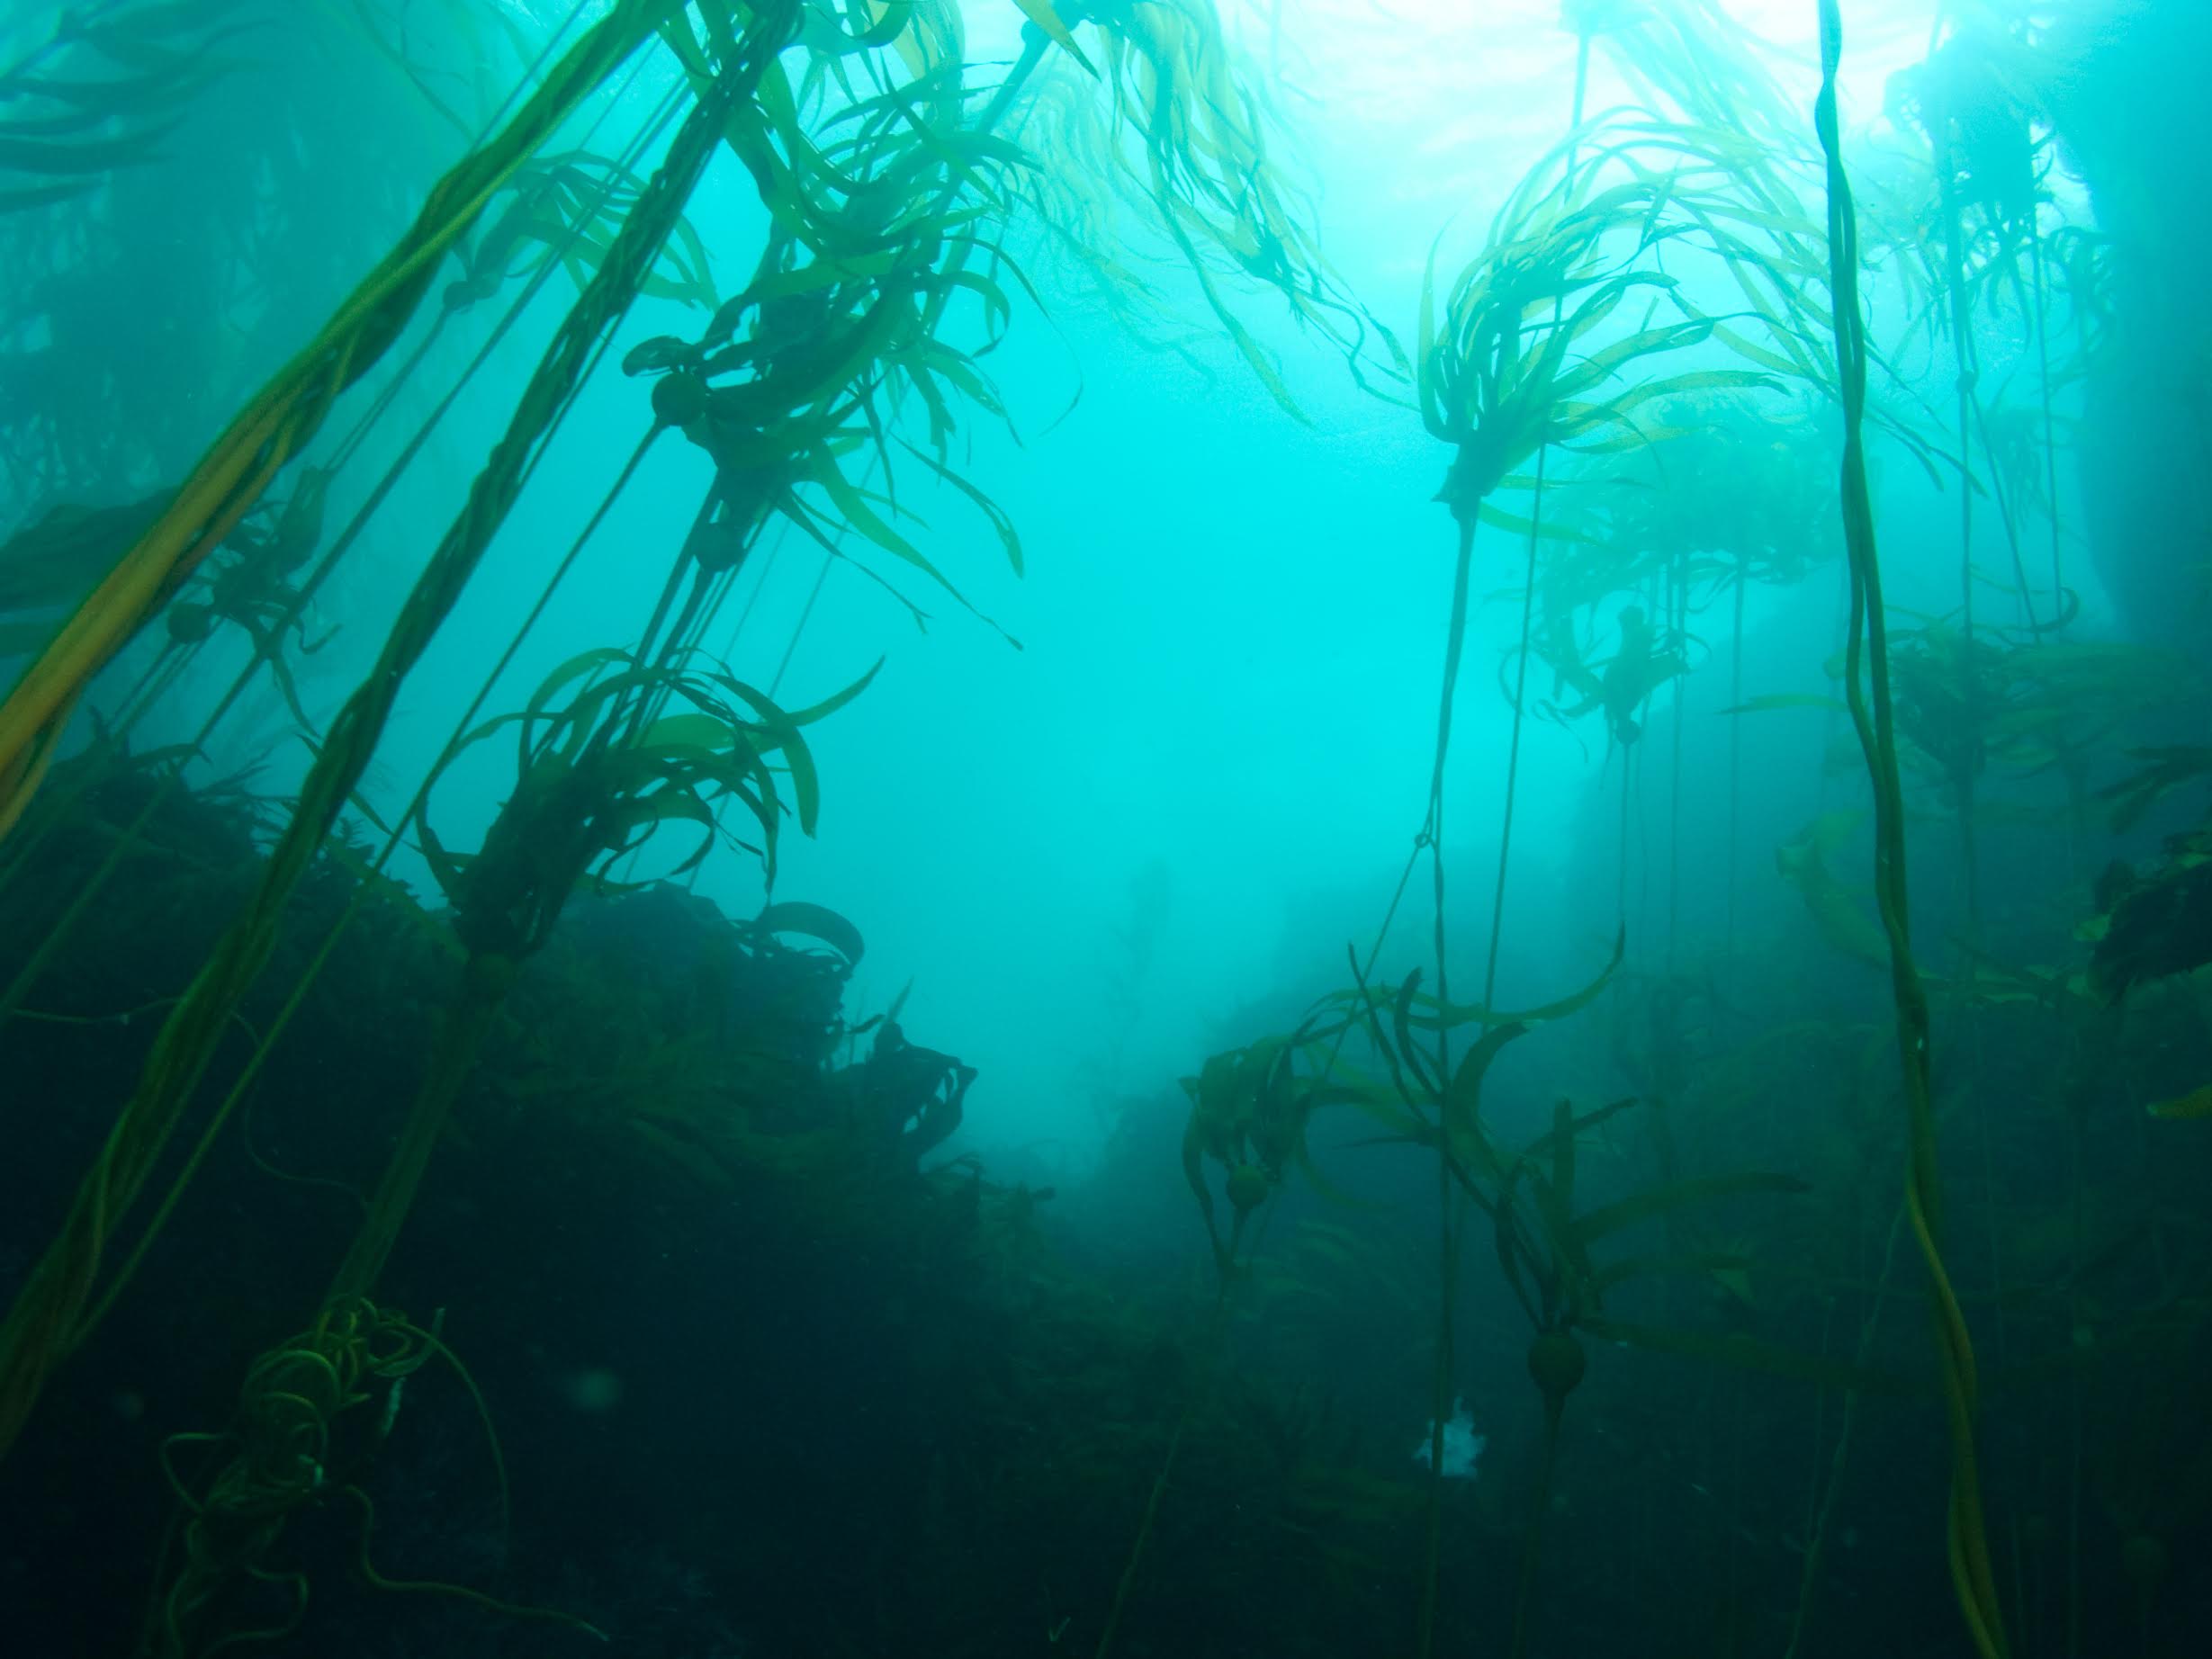 Bull kelp forests provide numerous habitats for nearshore fish and invertebrate species in the Gulf of the Farallones National Marine Sanctuary. (Jared Figurski, UCSC)